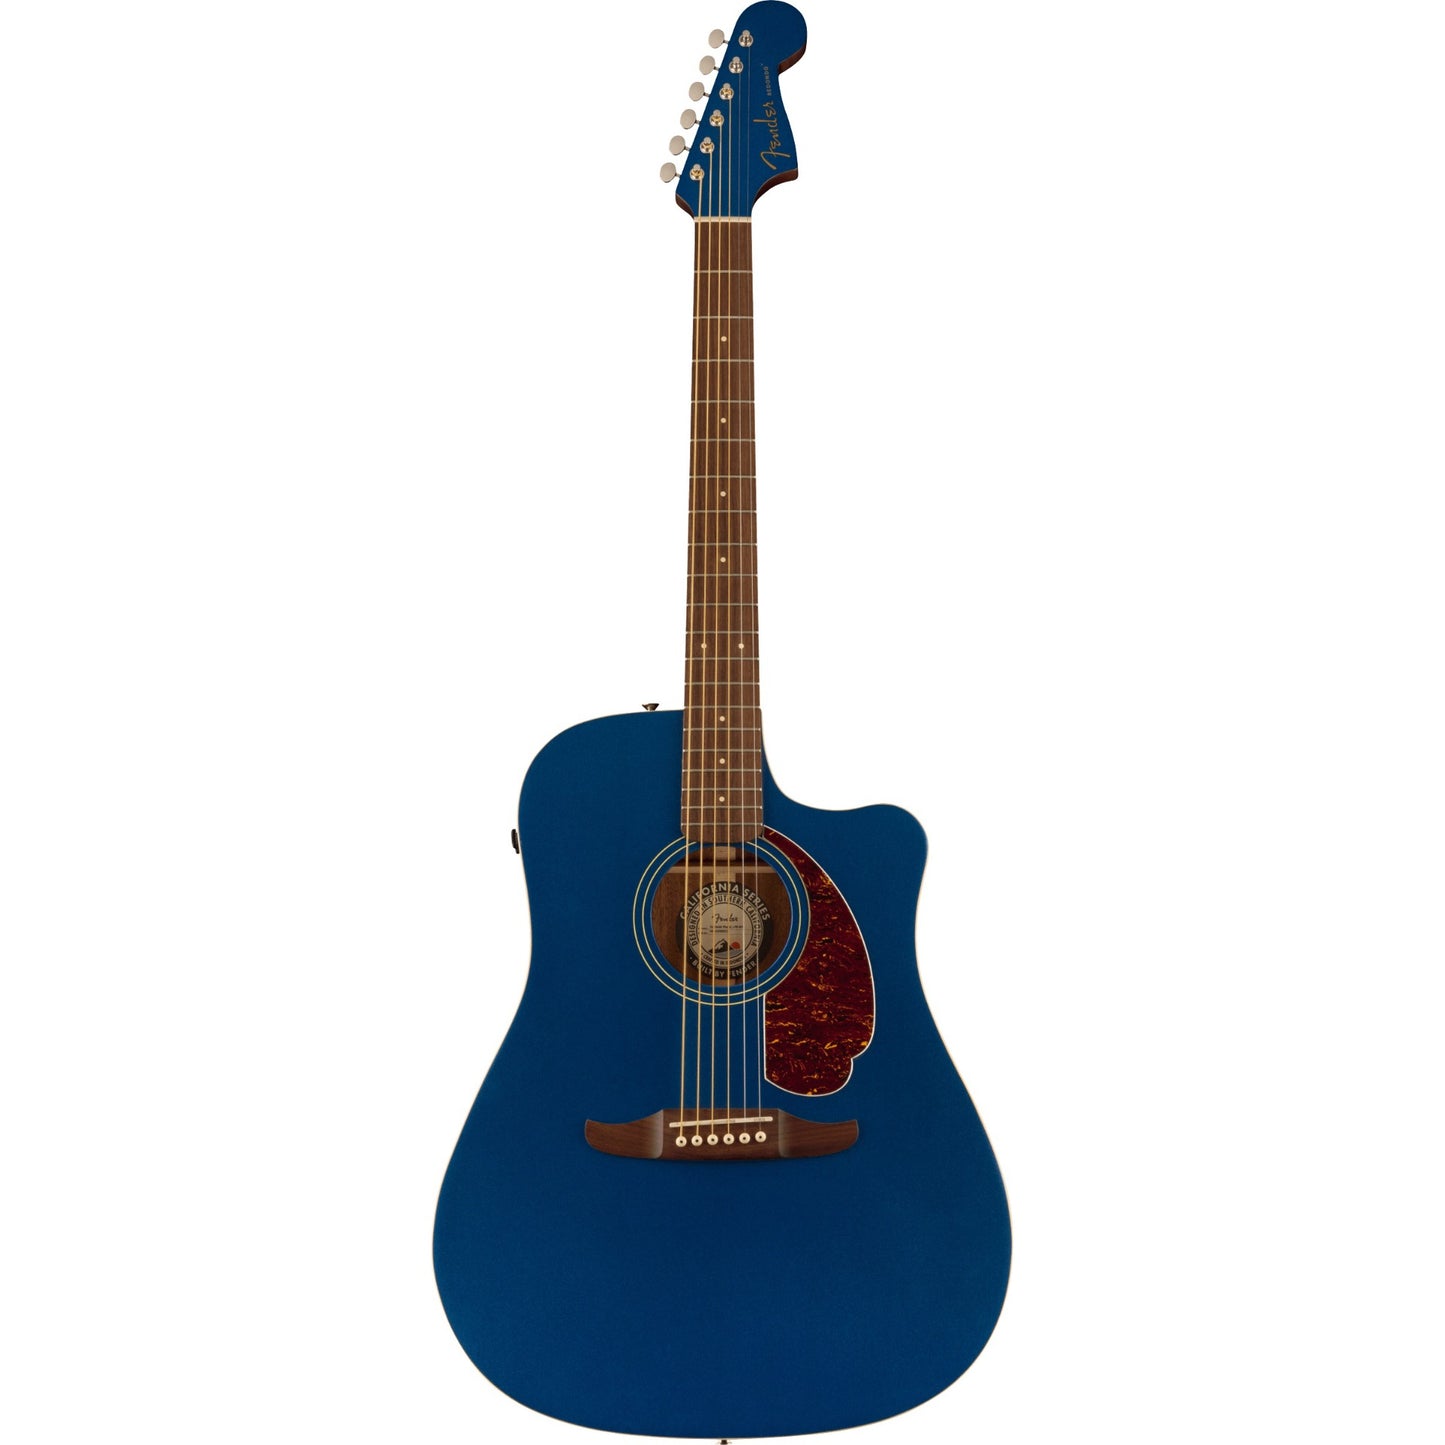 Fender Redondo Player Acoustic Electric Guitar - Lake Placid Blue